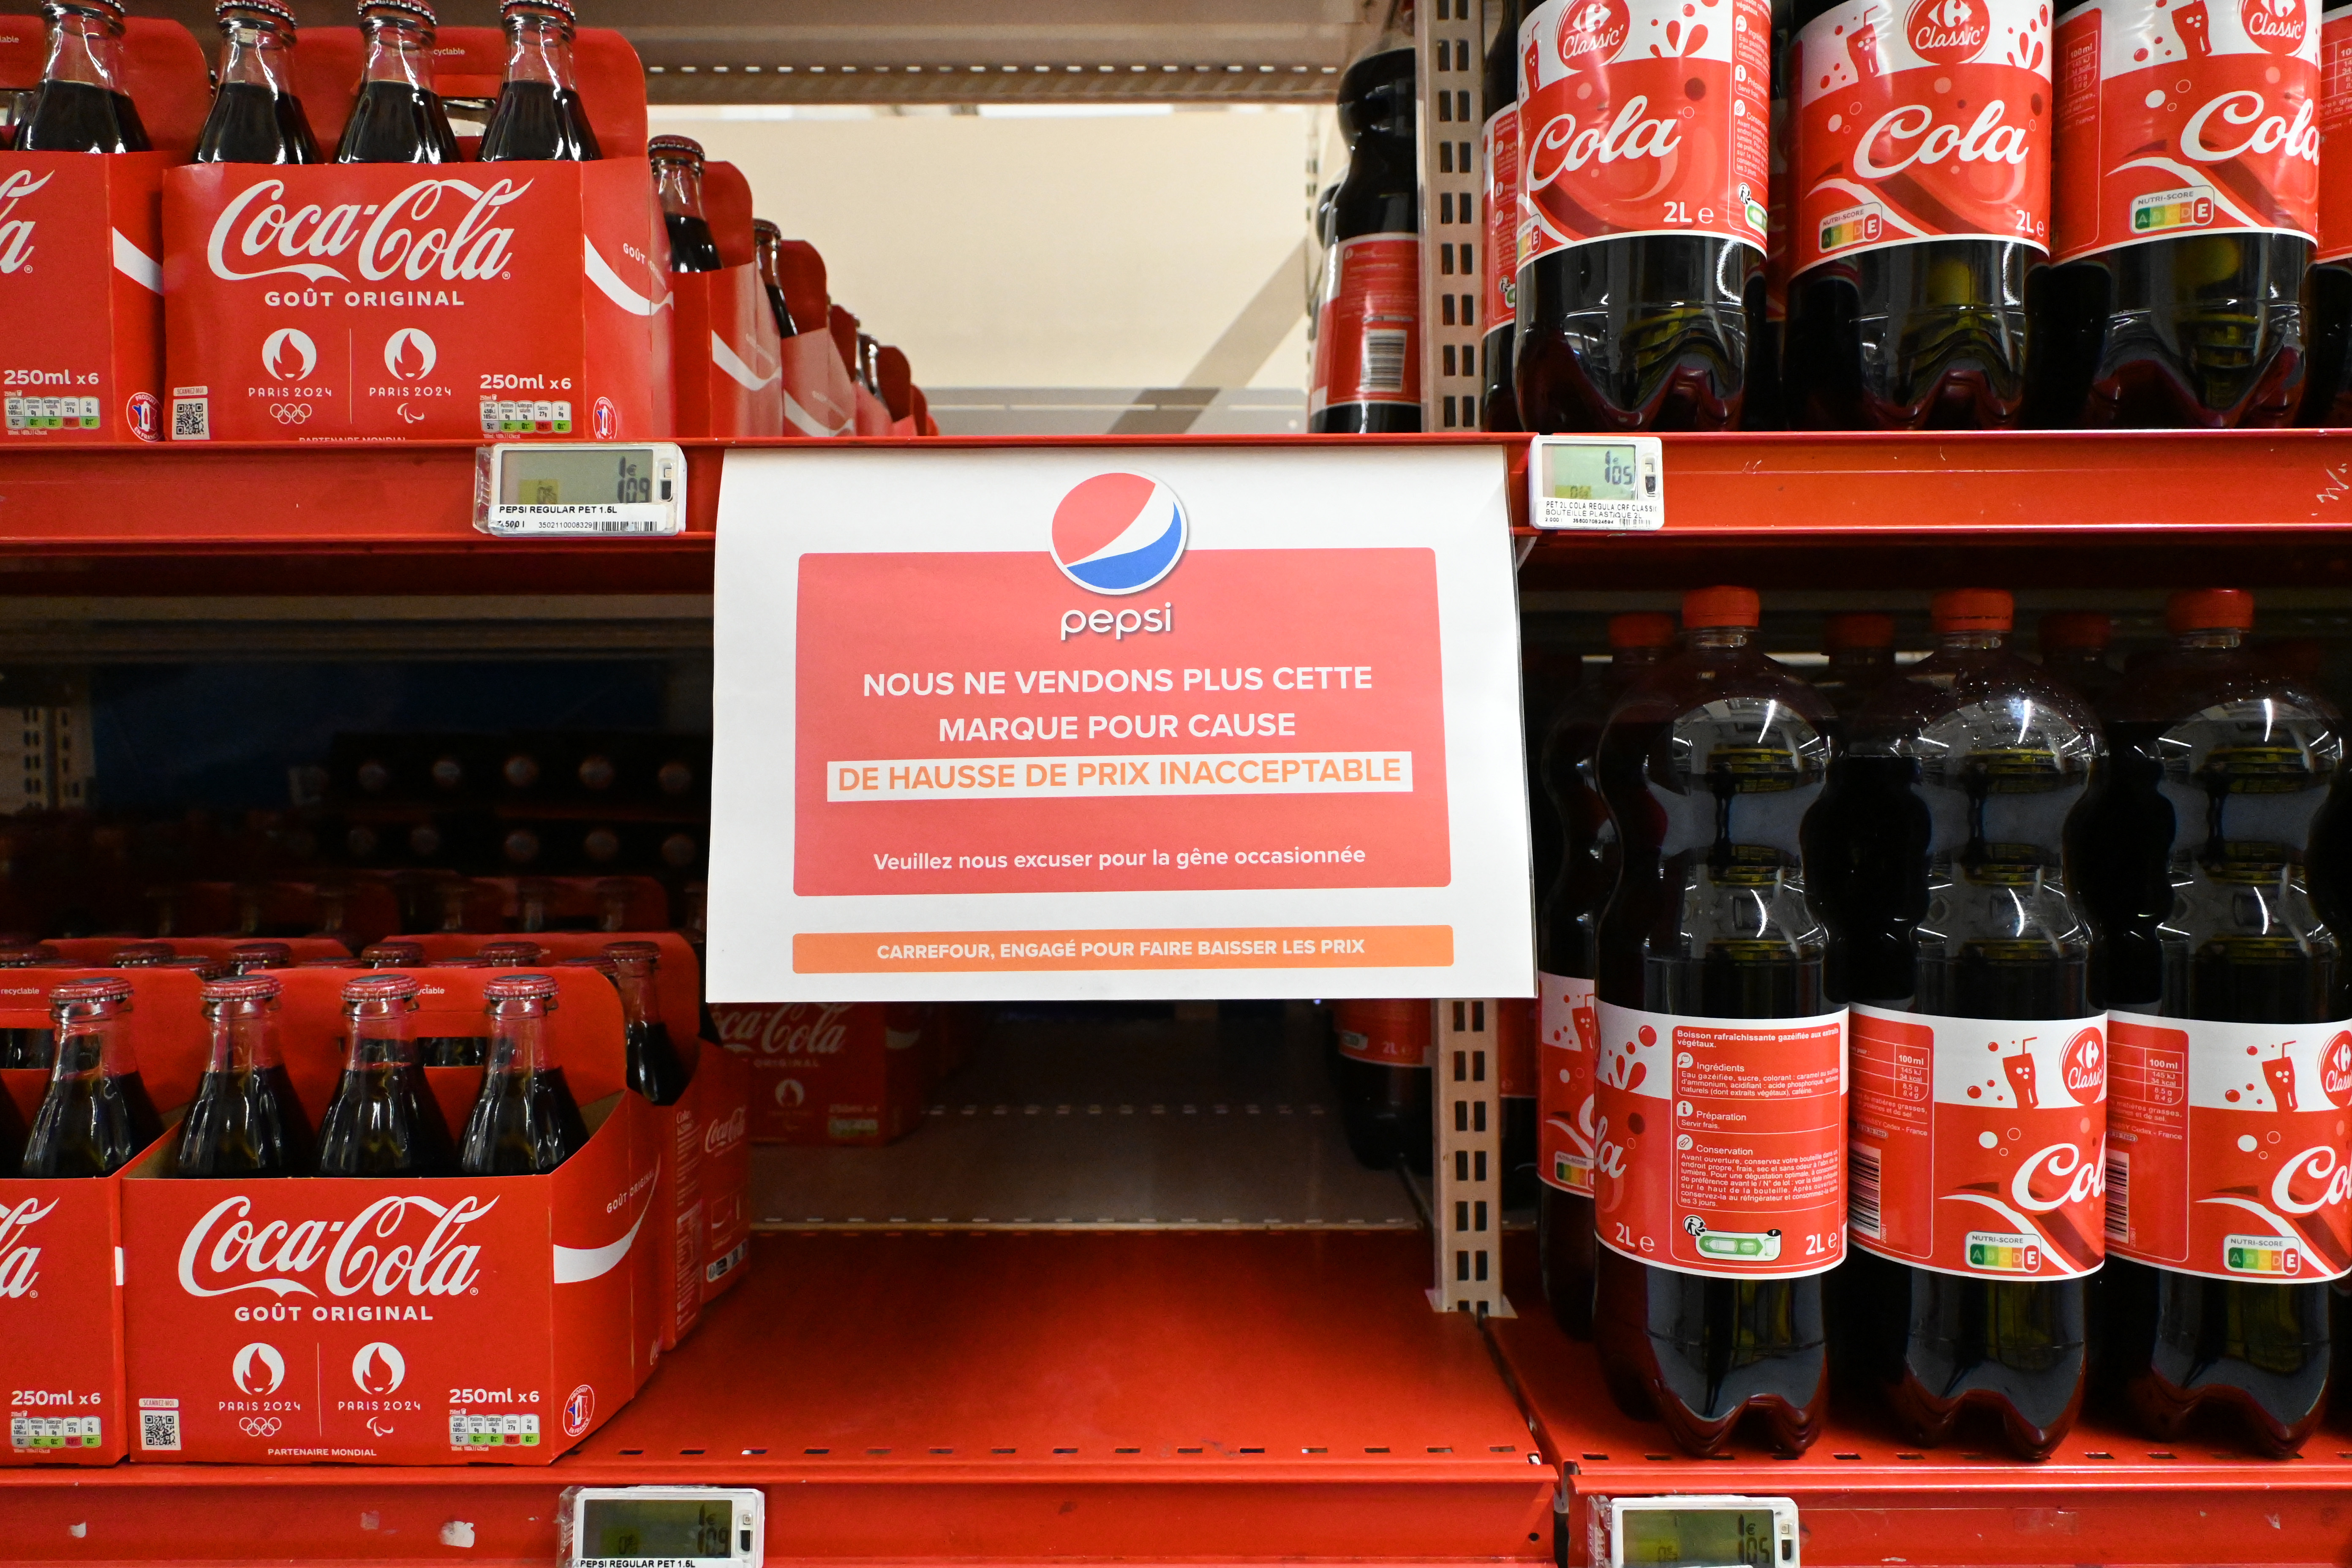 Grocery shelves with Coca-Cola bottles, with an empty space where Pepsi’s products would typically go. A sign written in French informs customers that some PepsiCo products are not available due to unacceptable price increases.